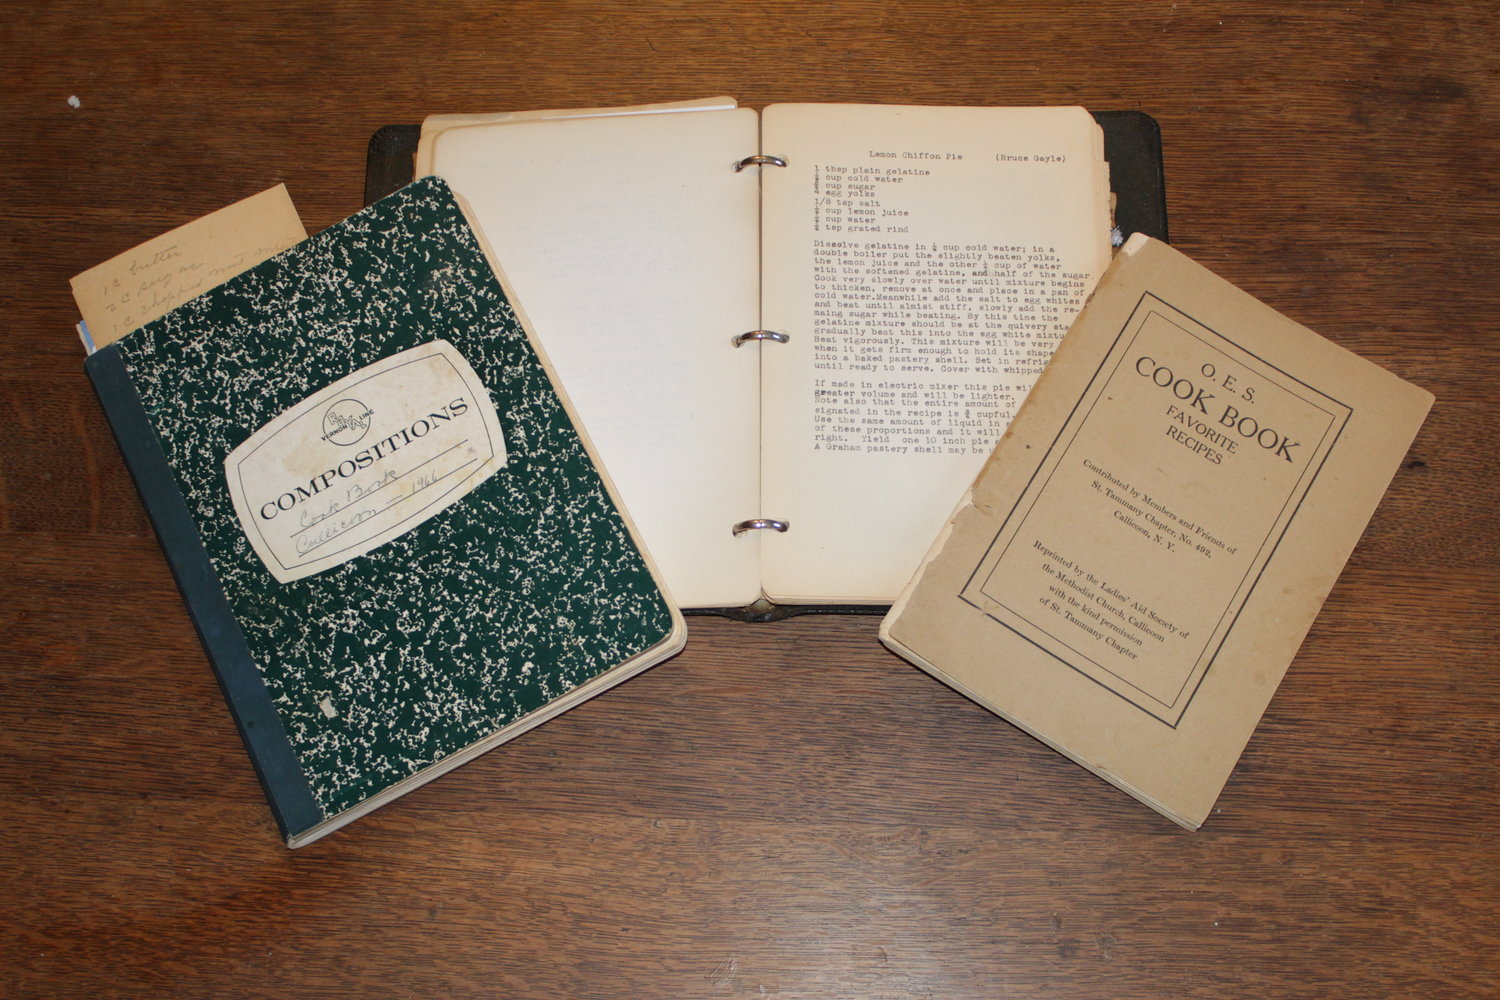 Some of Great-Grandmother Anna Schuster’s cookbooks; two are her own recipe collections and one is from the St. Tammany Chapter of, maybe, the Eastern Star? Reprinted by the Methodist Ladies’ Aid Society.